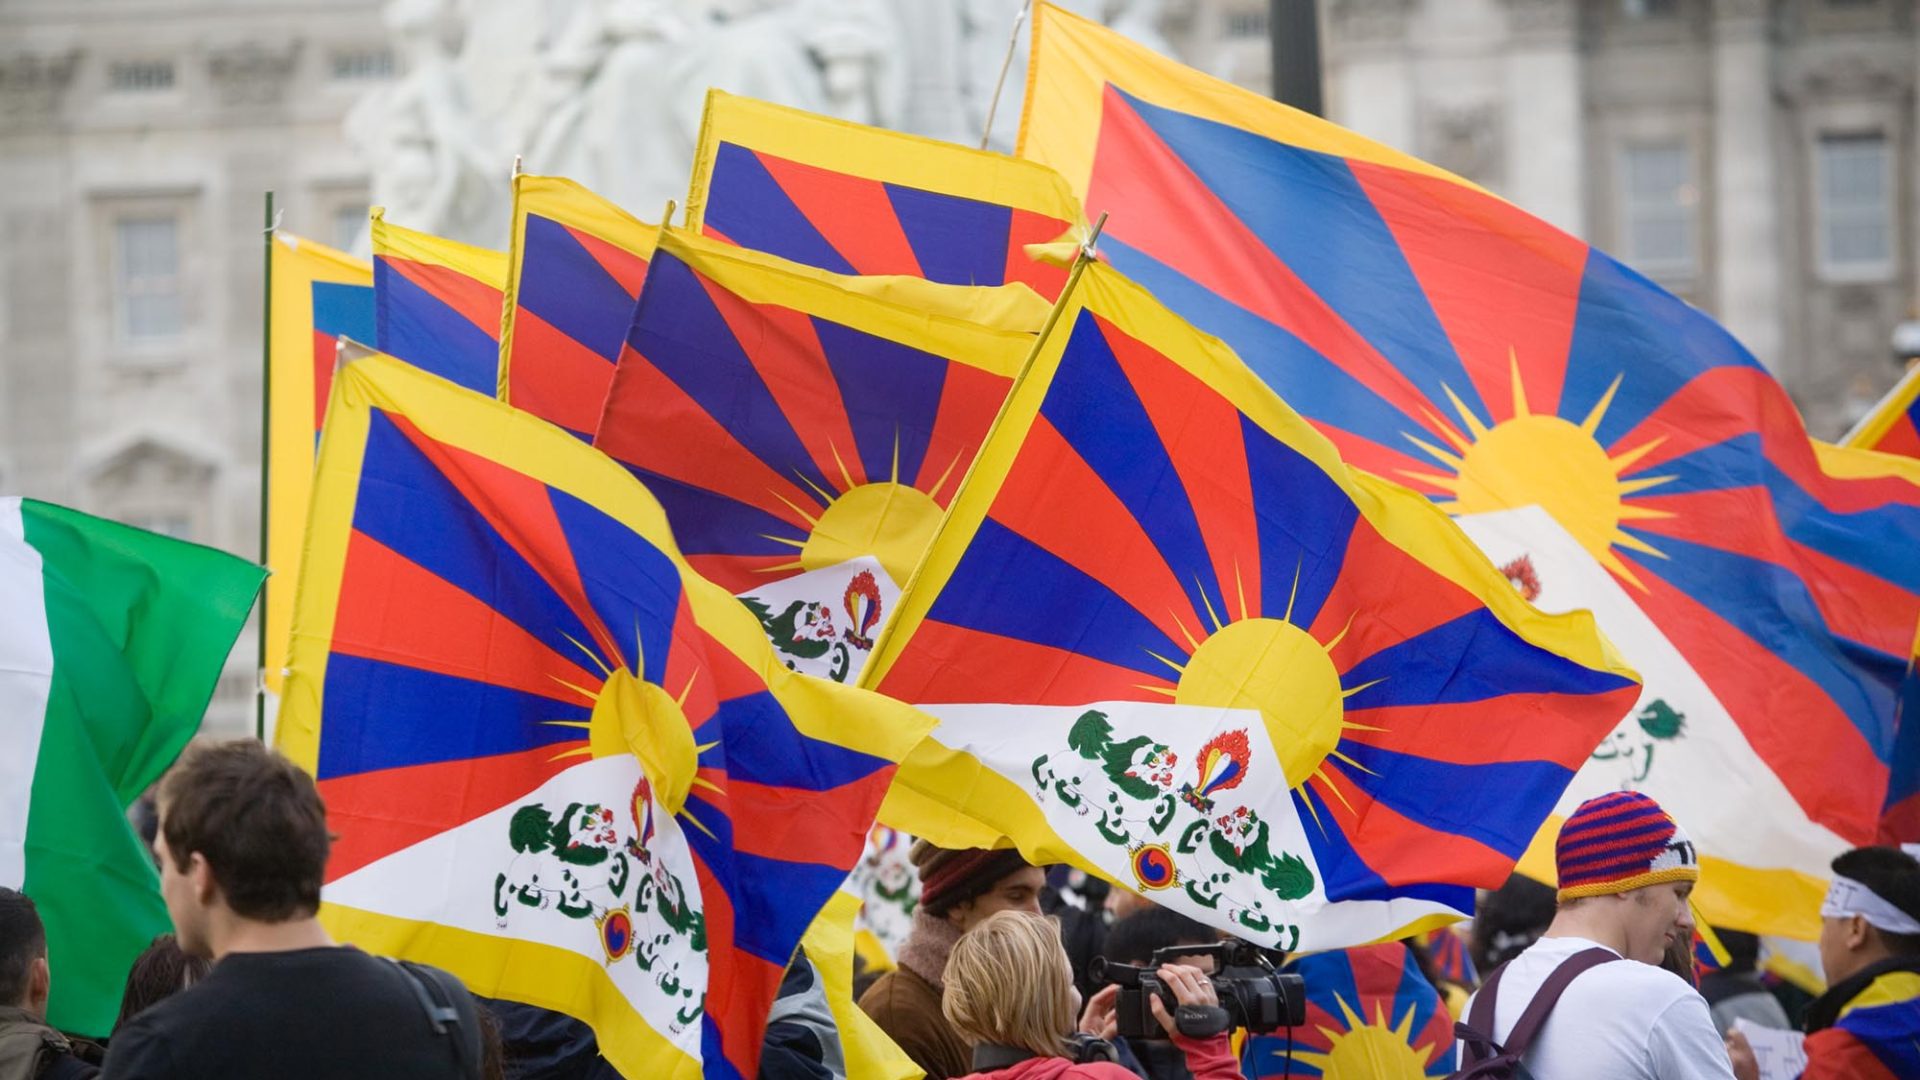 Tibetan flags at protest